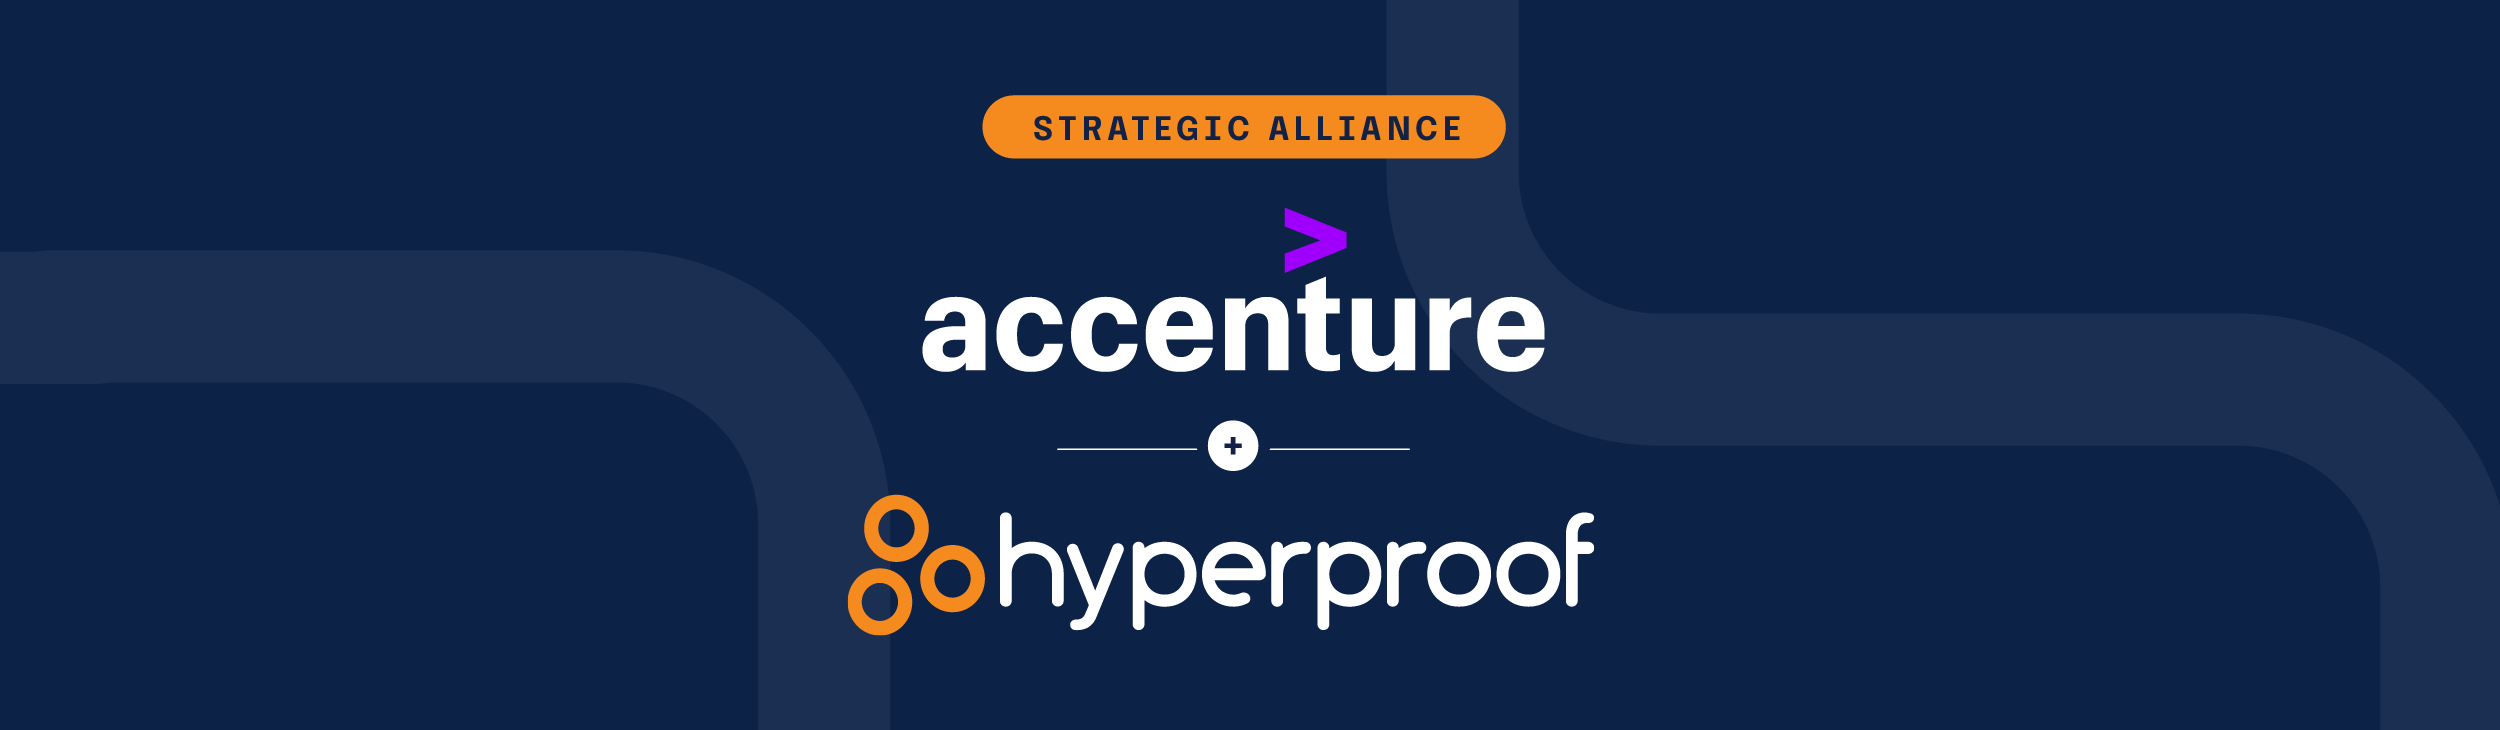 Hyperproof announces strategic alliance with accenture